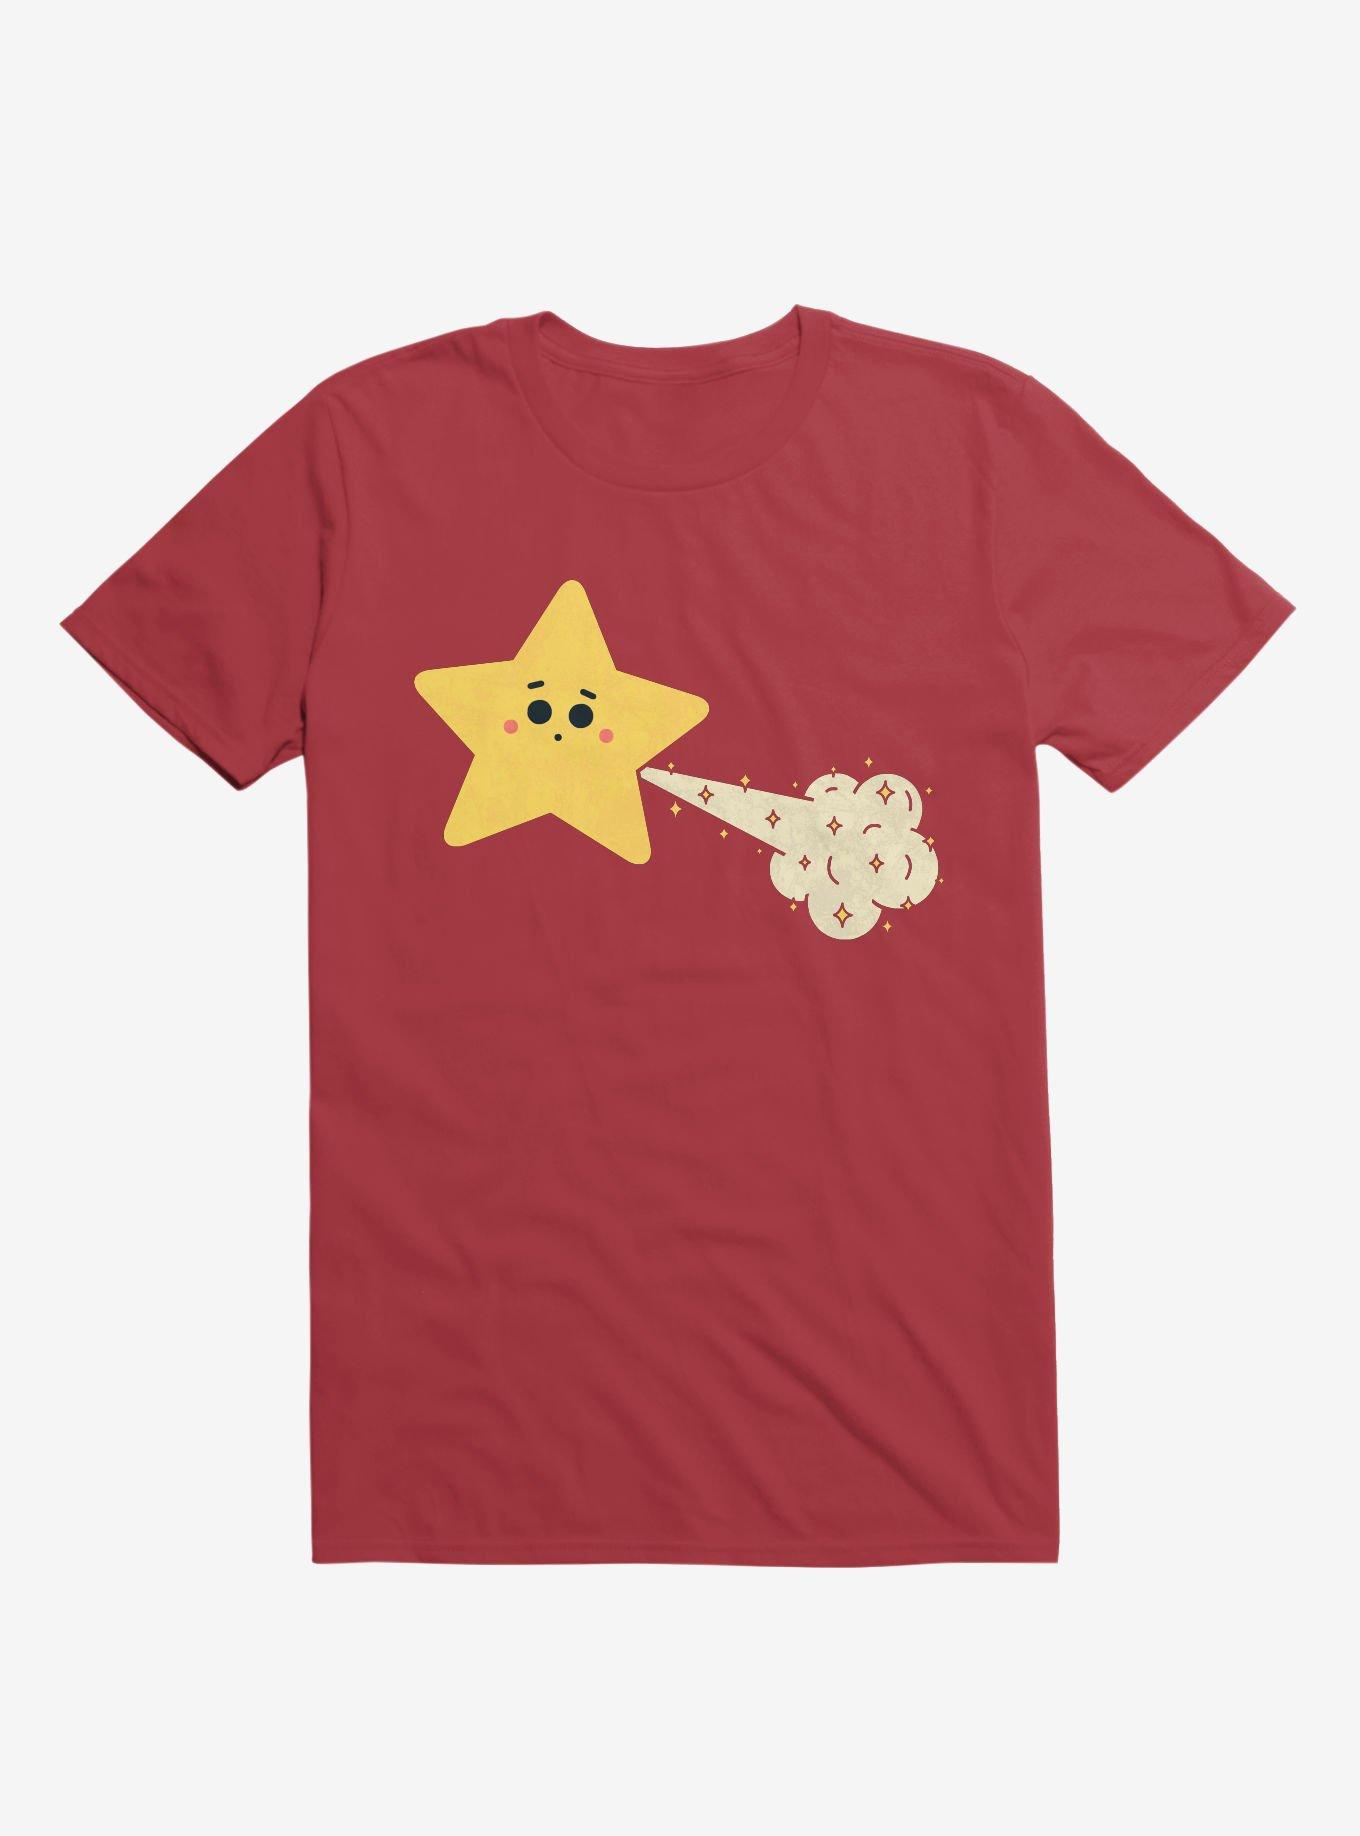 Sparkle Tooting Star Red T-Shirt, , hi-res